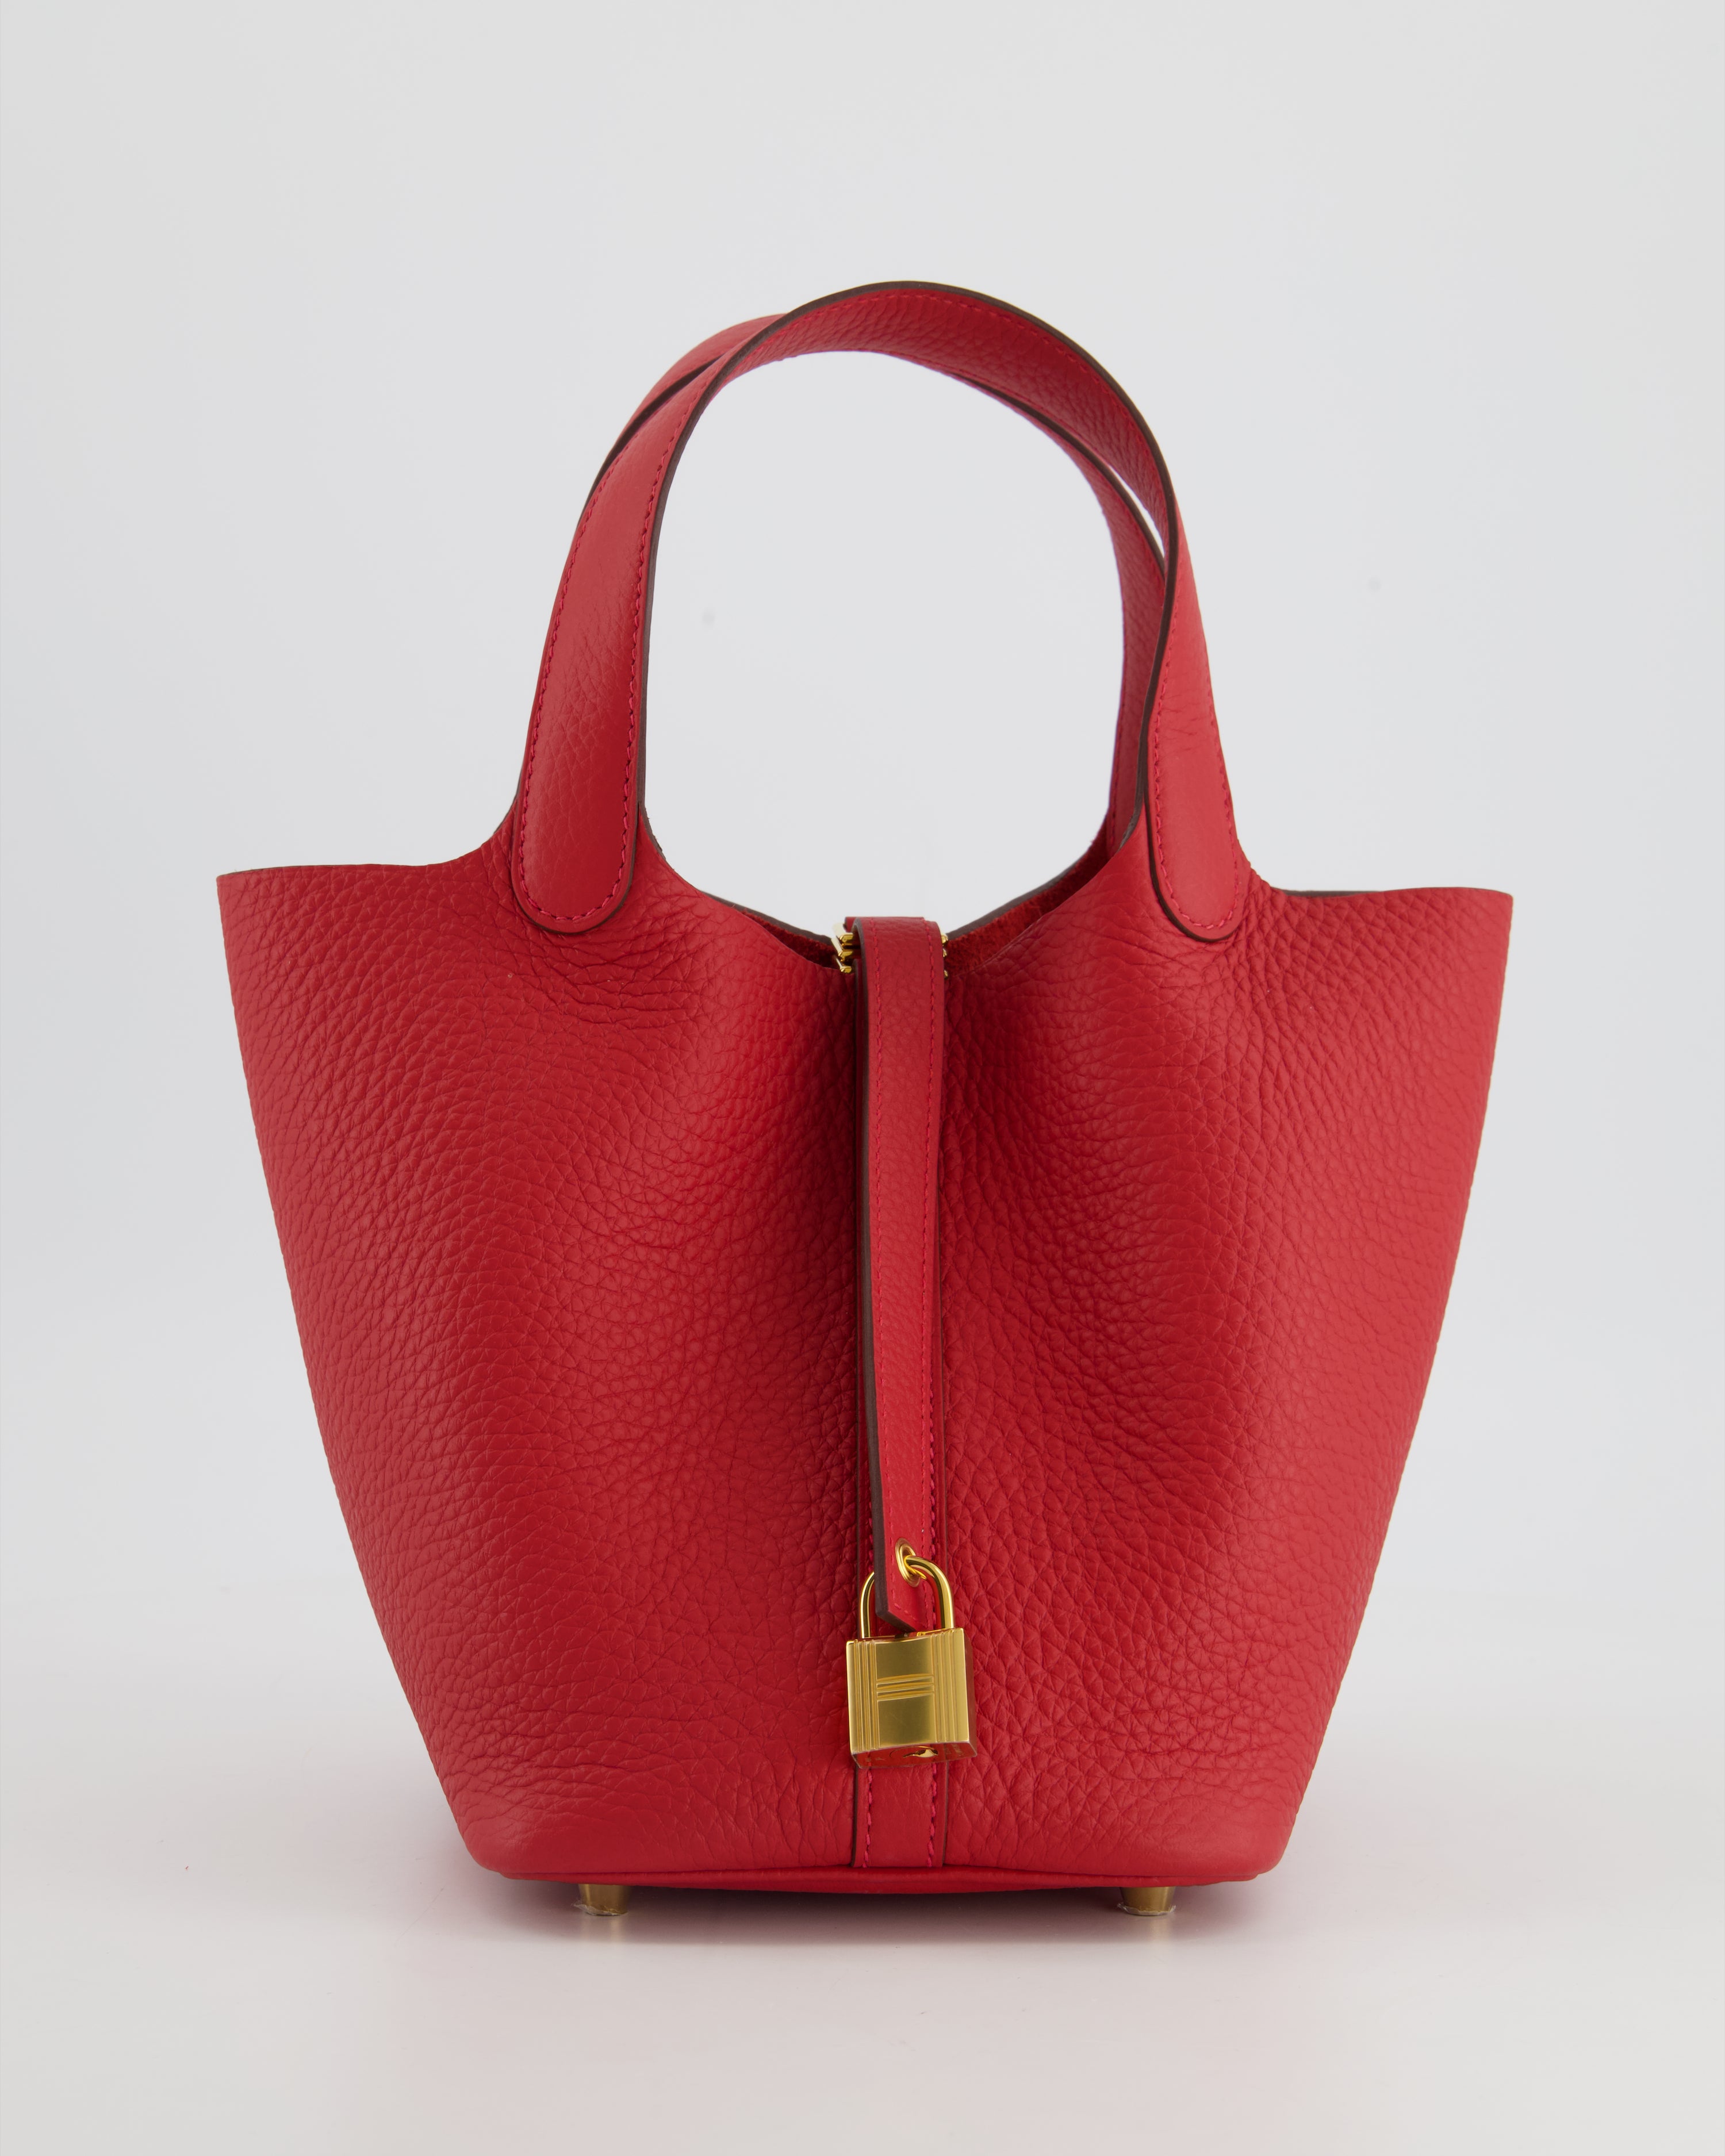 HERMÈS Picotin Gold Bags & Handbags for Women for sale